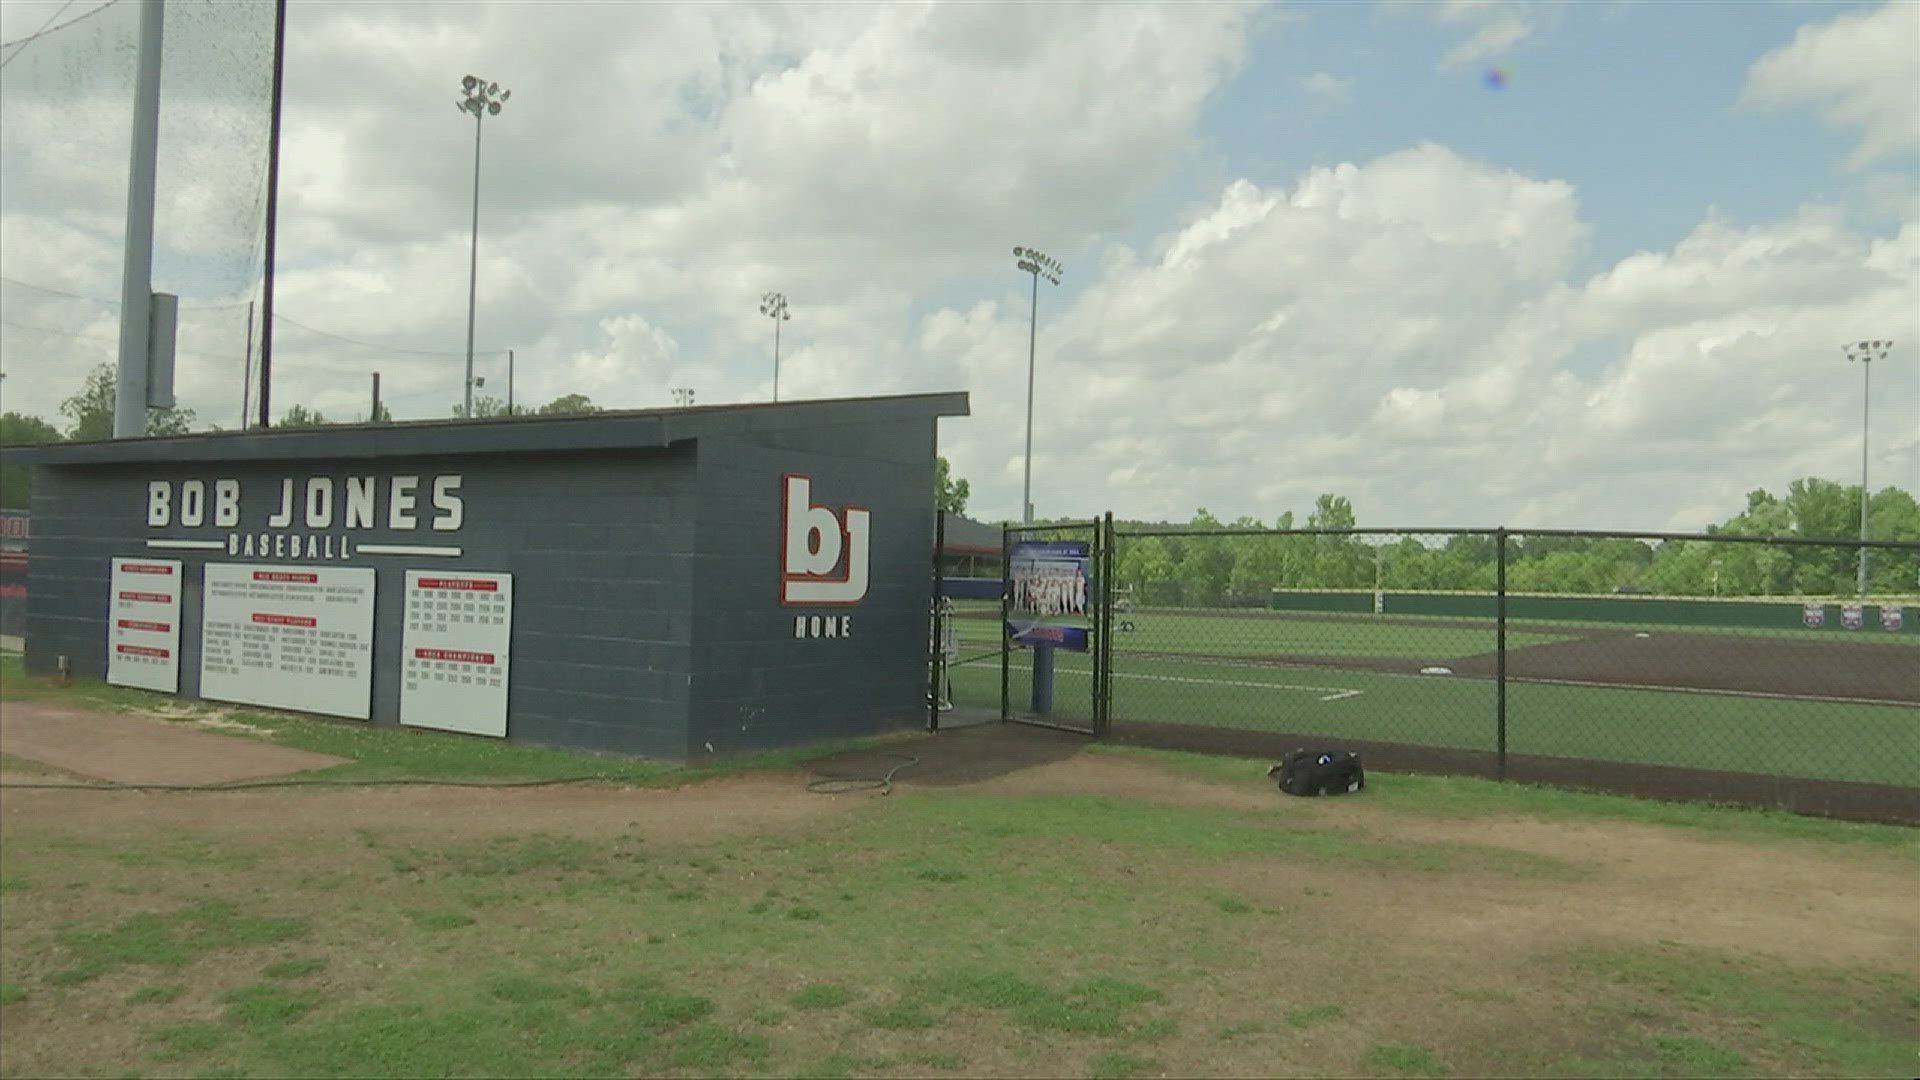 Bob Jones and James Clemens will face off in the 7A Baseball State Semifinals for the first time